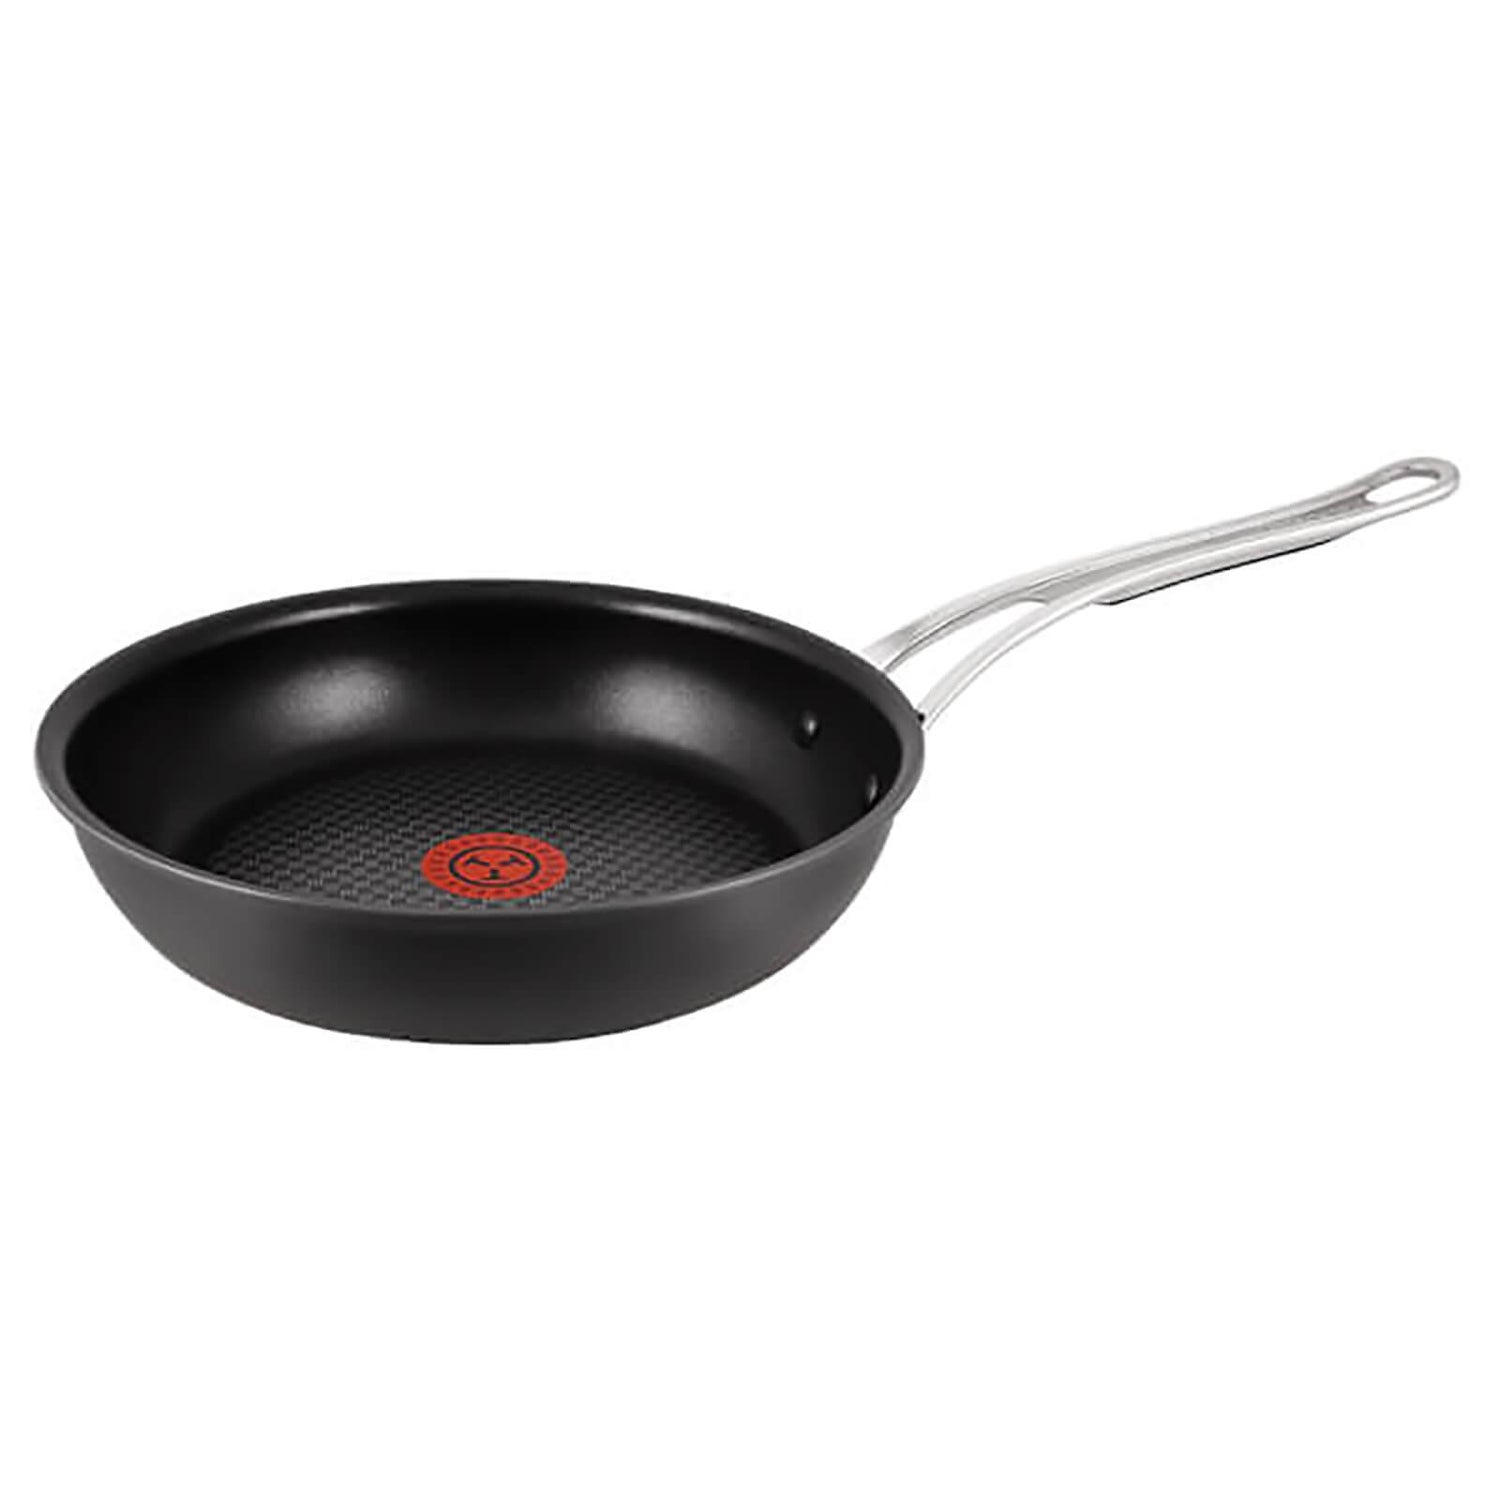 Jamie Oliver by Tefal Homeware Anodised - Pan - Non-Stick Hard Zavvi US Frying 28cm